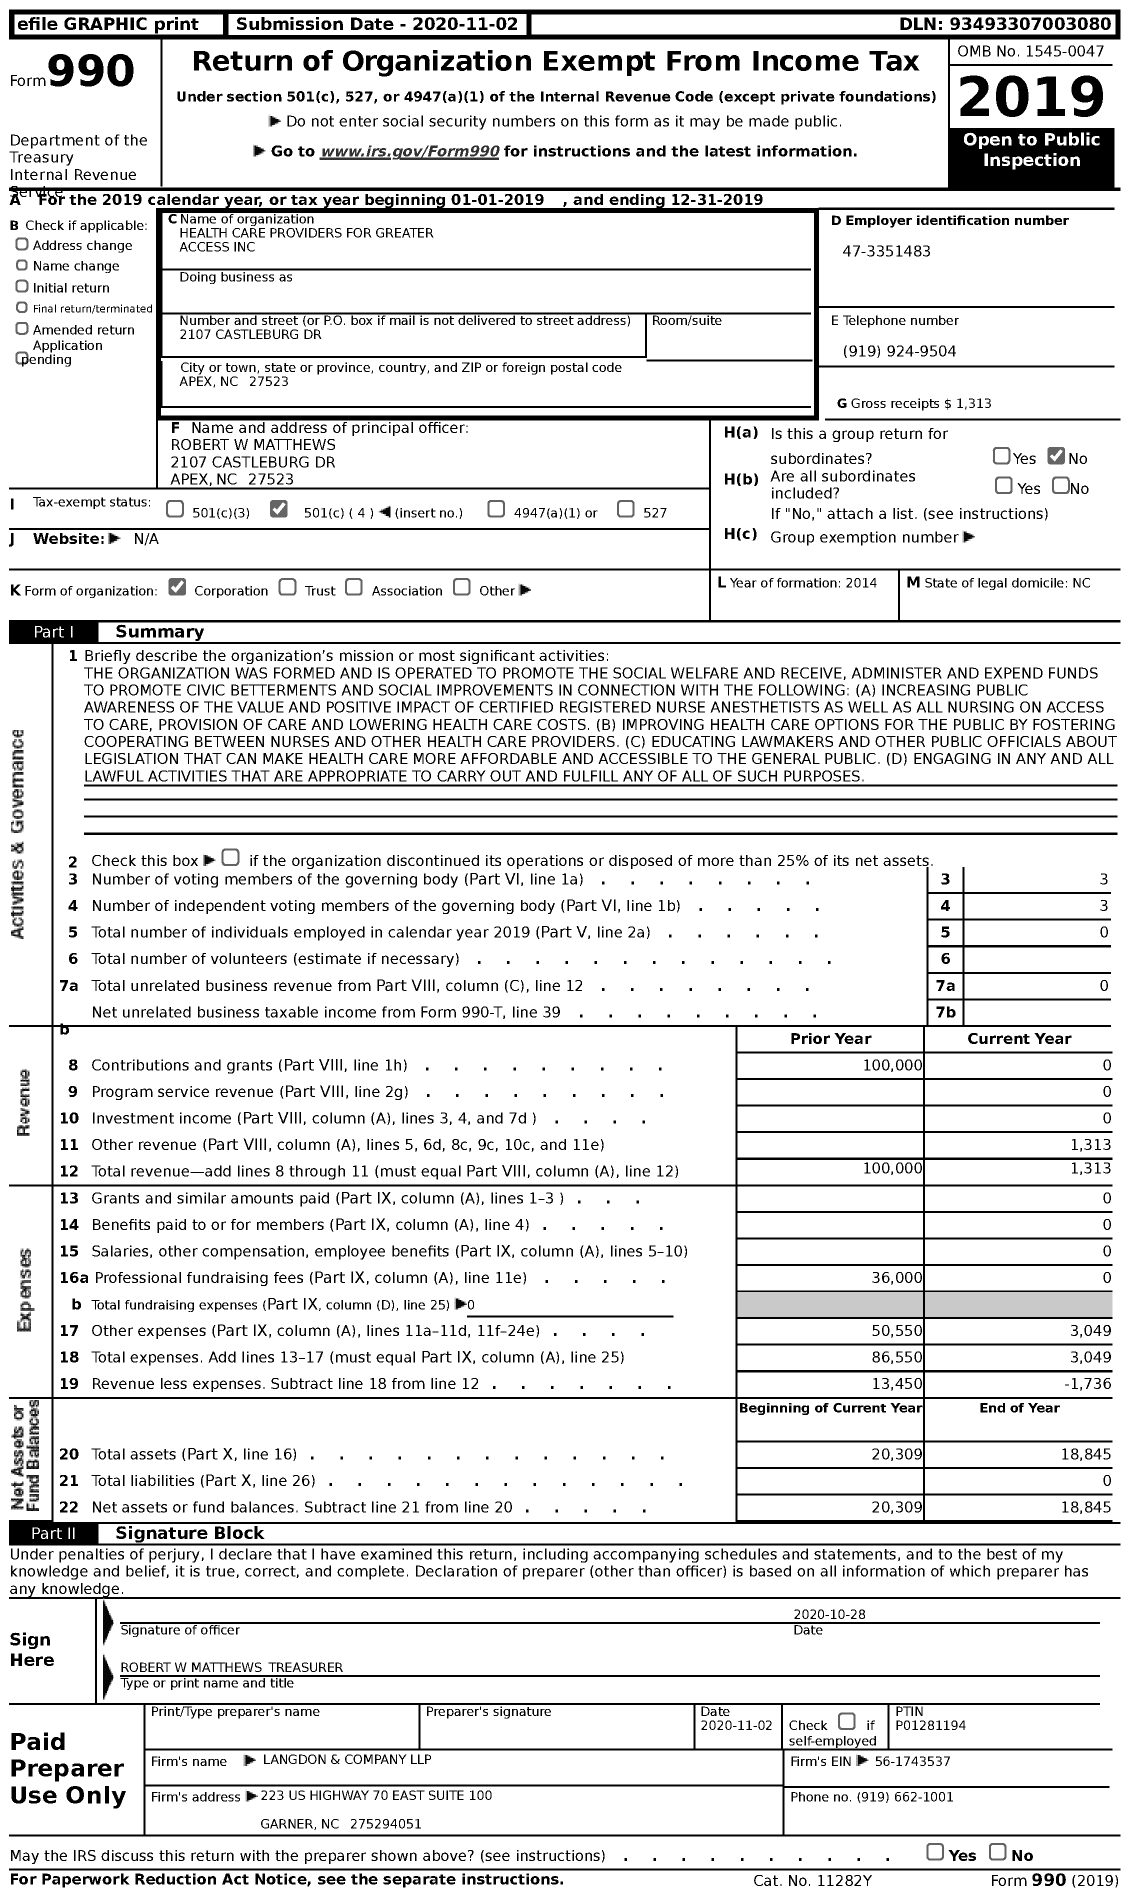 Image of first page of 2019 Form 990 for Health Care Providers for Greater Access